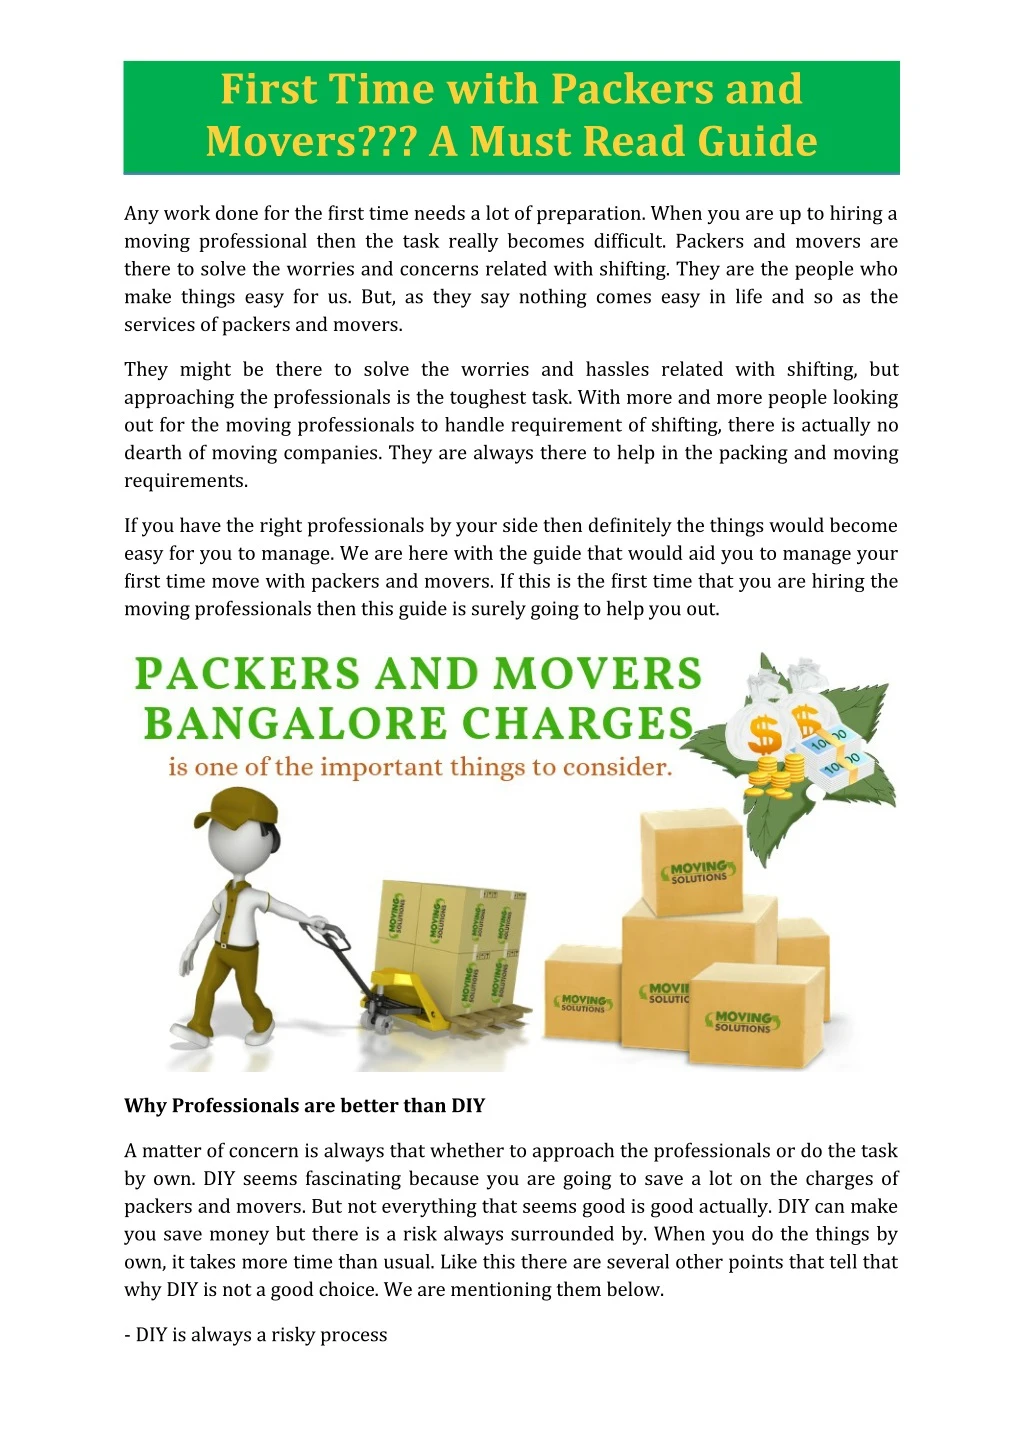 first time with packers and movers a must read